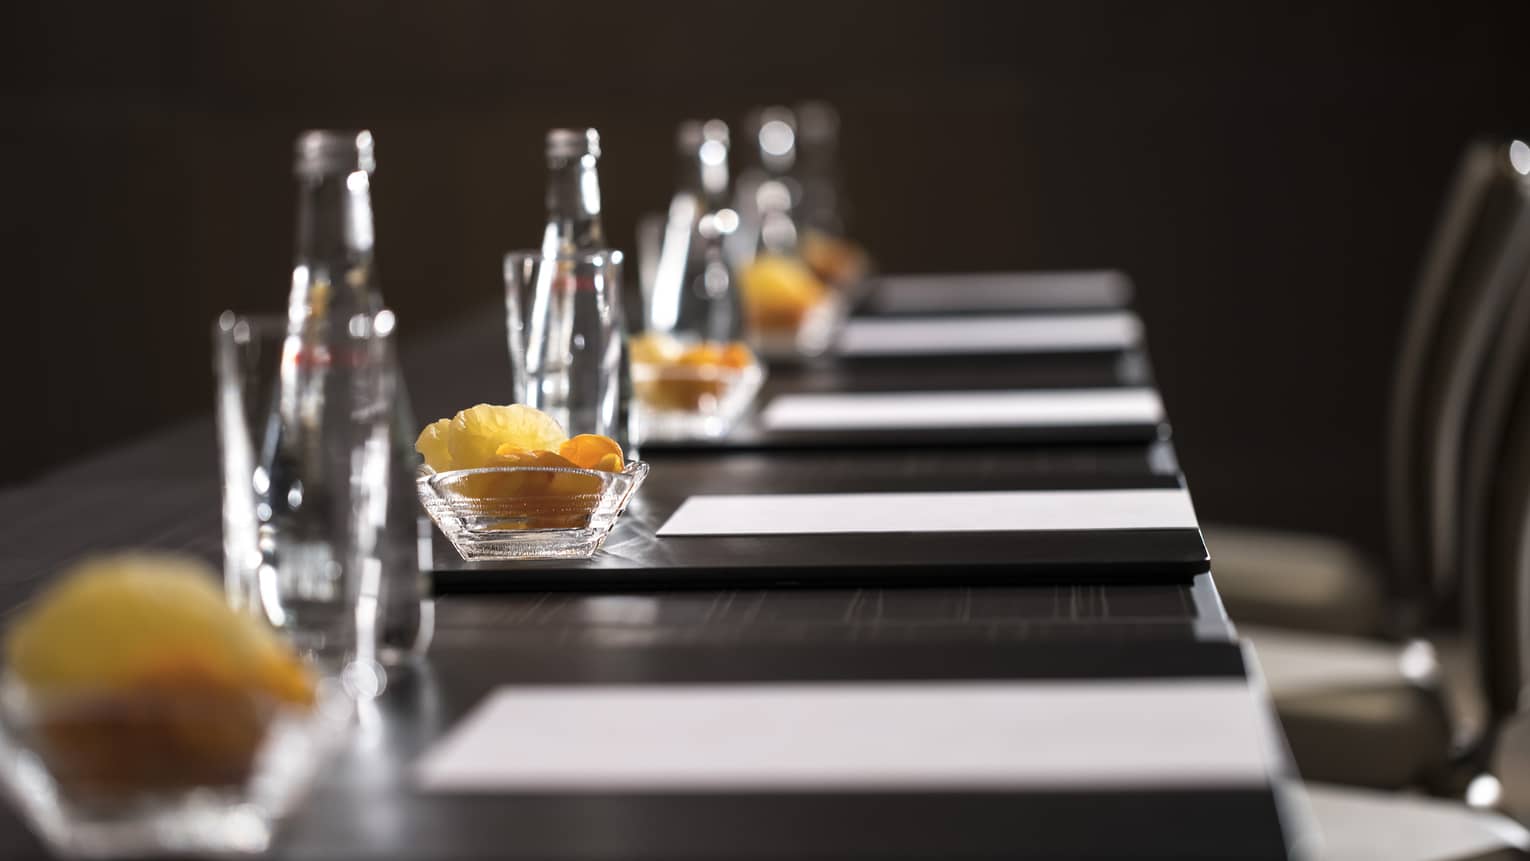 Row of glass bottles, small dishes with dried fruits, meeting agendas along boardroom table